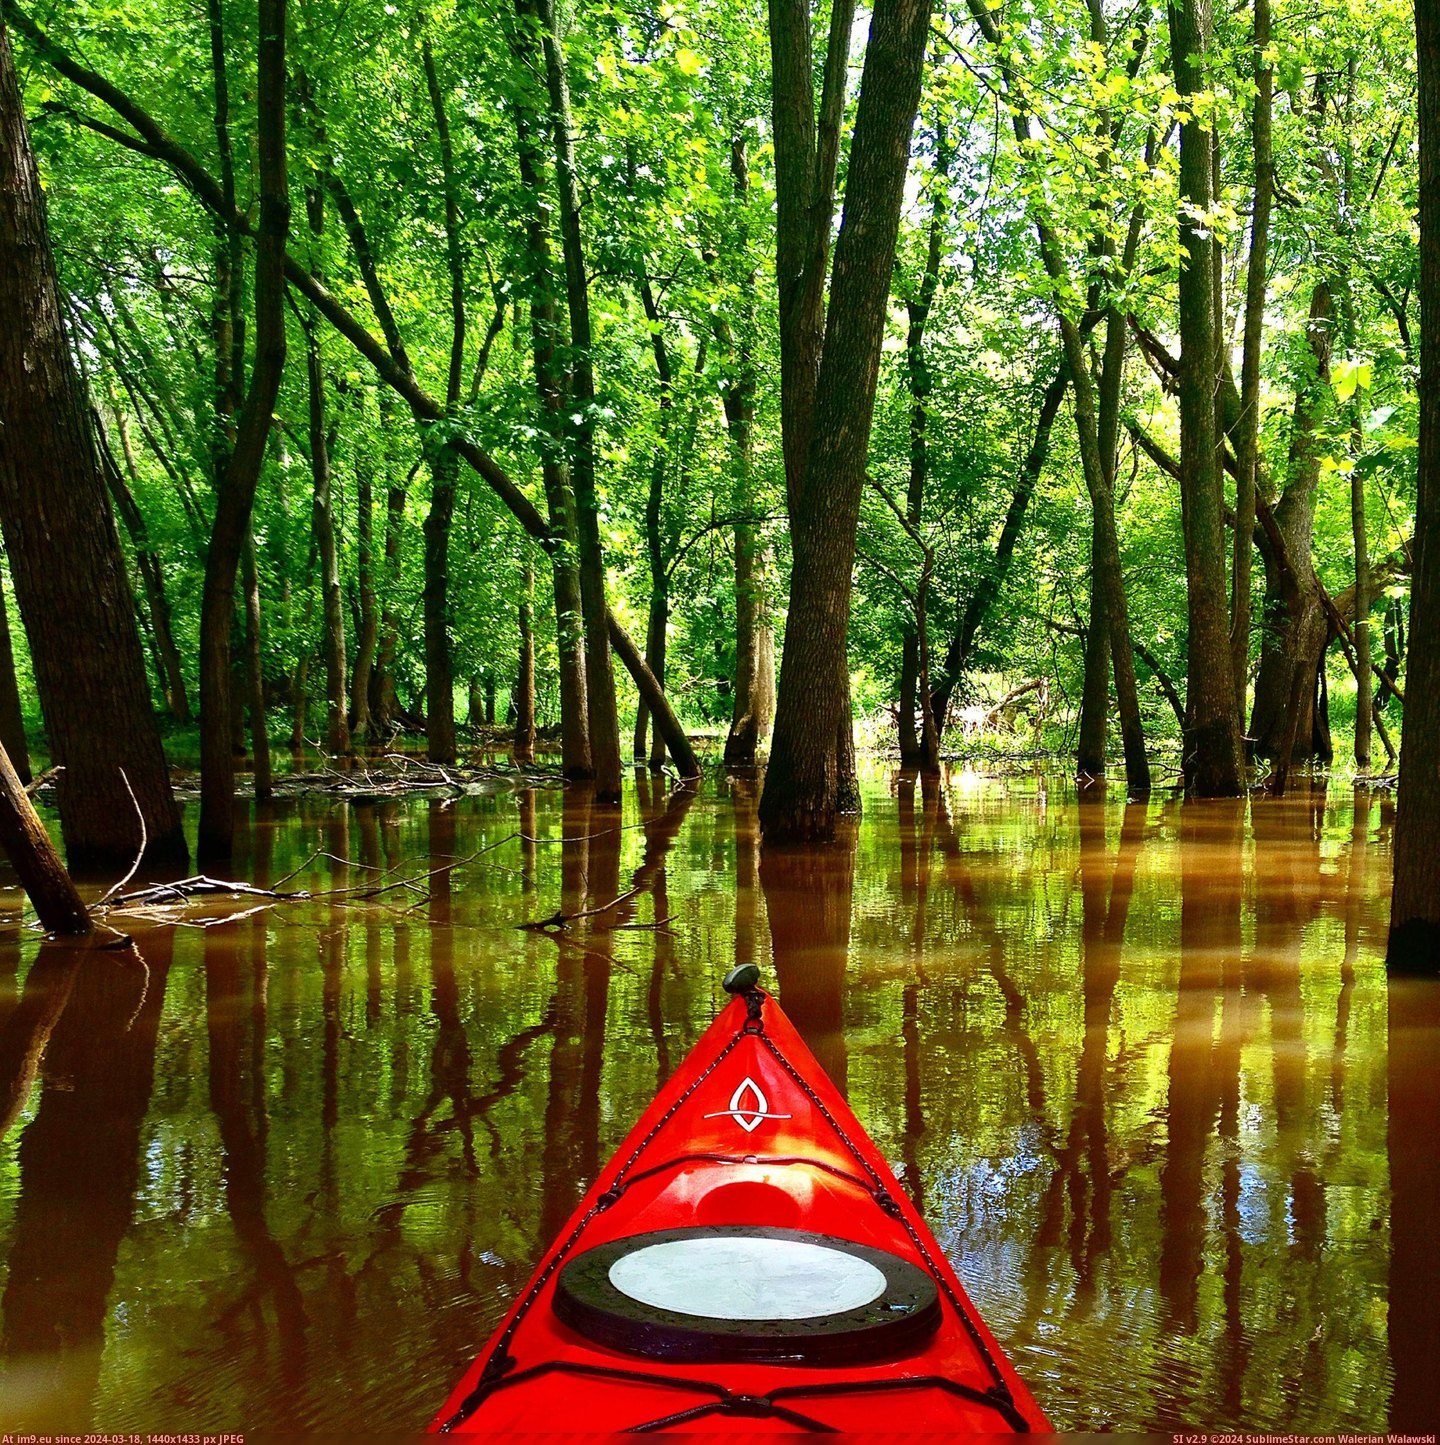 #Day #Spent #Kayaking #Flooding #Forest #Area [Pics] There has been some flooding in my area recently so I spent the day kayaking through the forest Pic. (Image of album My r/PICS favs))